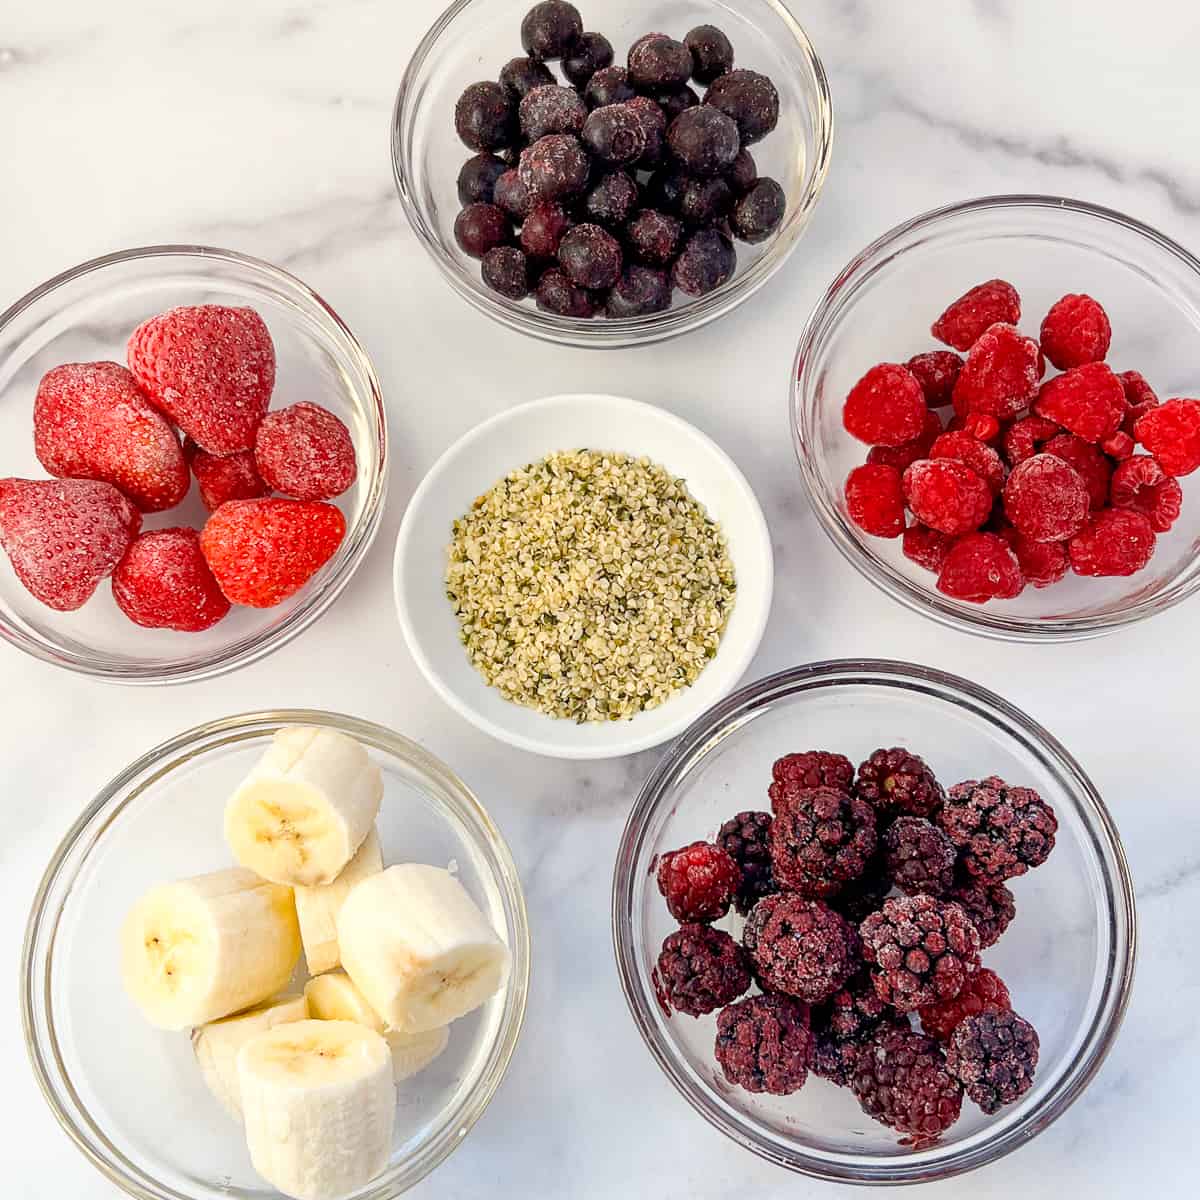 top view of key ingredients for mixed berry smoothie: frozen blueberries, frozen raspberries, frozen strawberries, frozen blackberries, banana and hemp hears